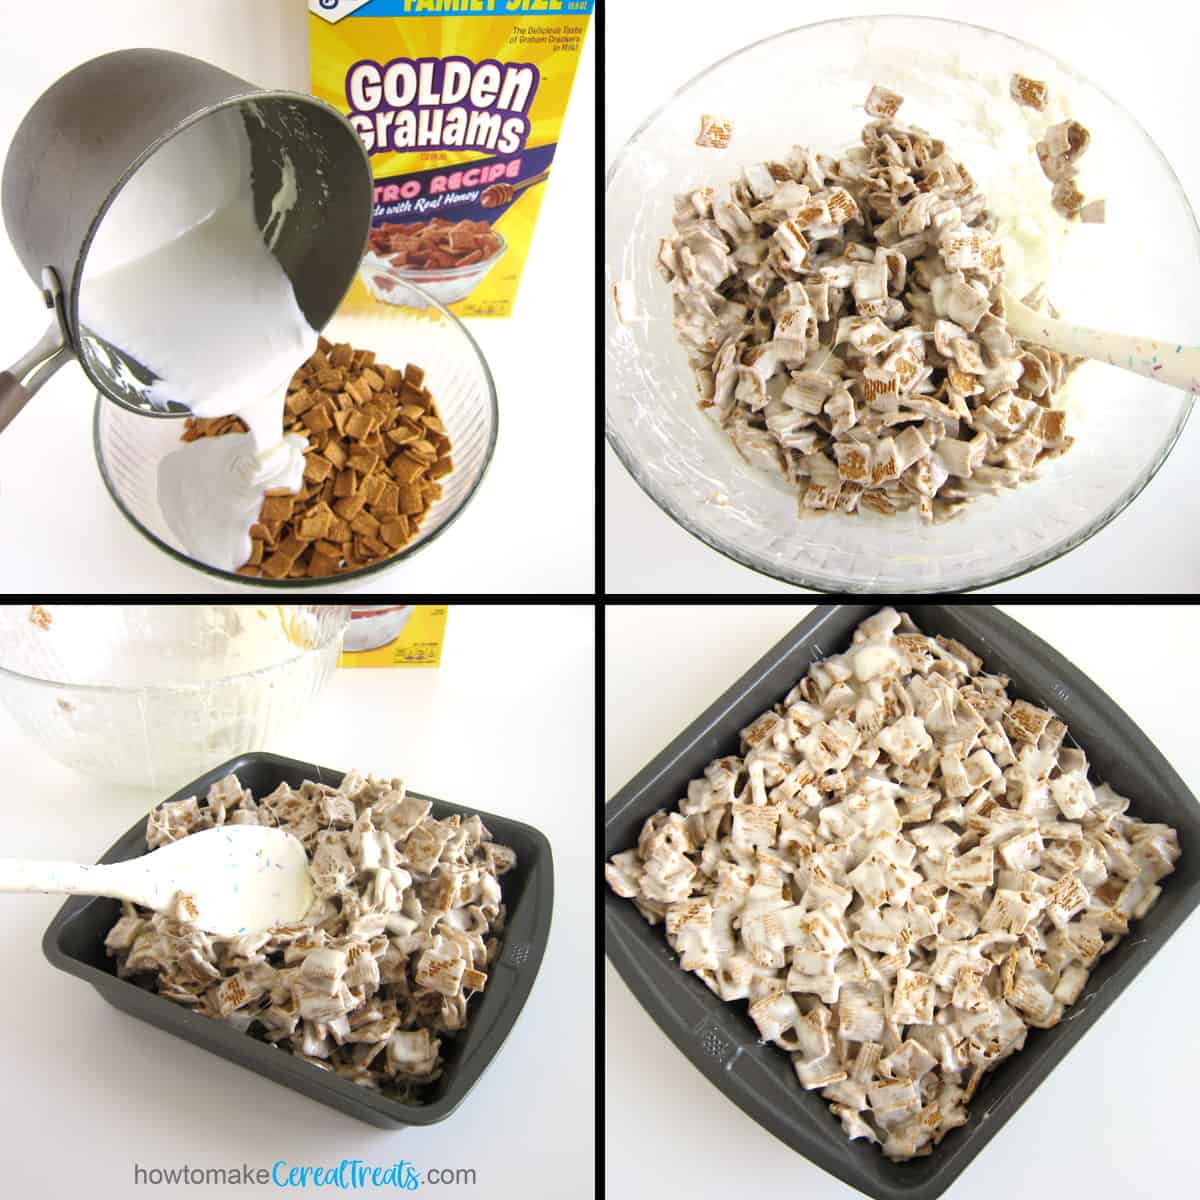 making Golden Grahams treats by pouring melted marshmallows and butter over the cereal